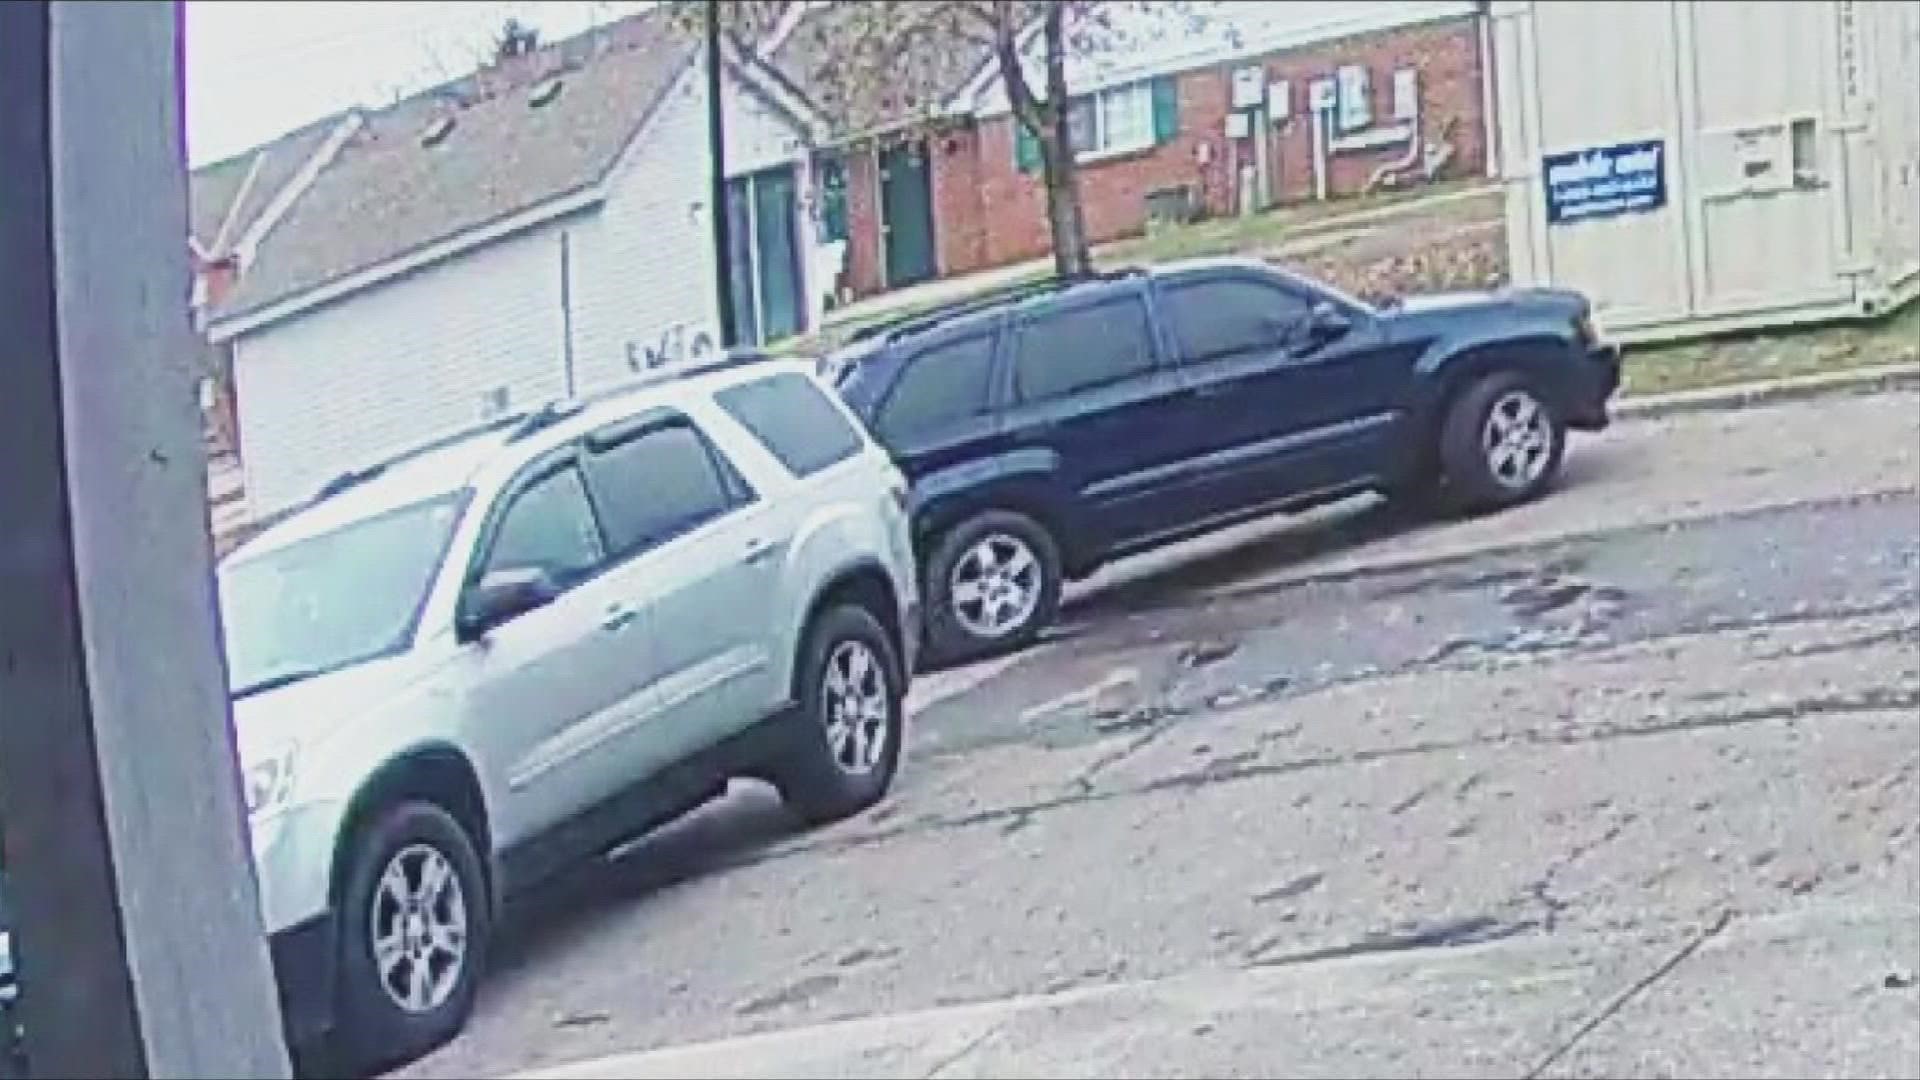 Police said hours of surveillance footage shows the two vehicles conducted surveillance on the victim’s residence throughout the day of the shooting.